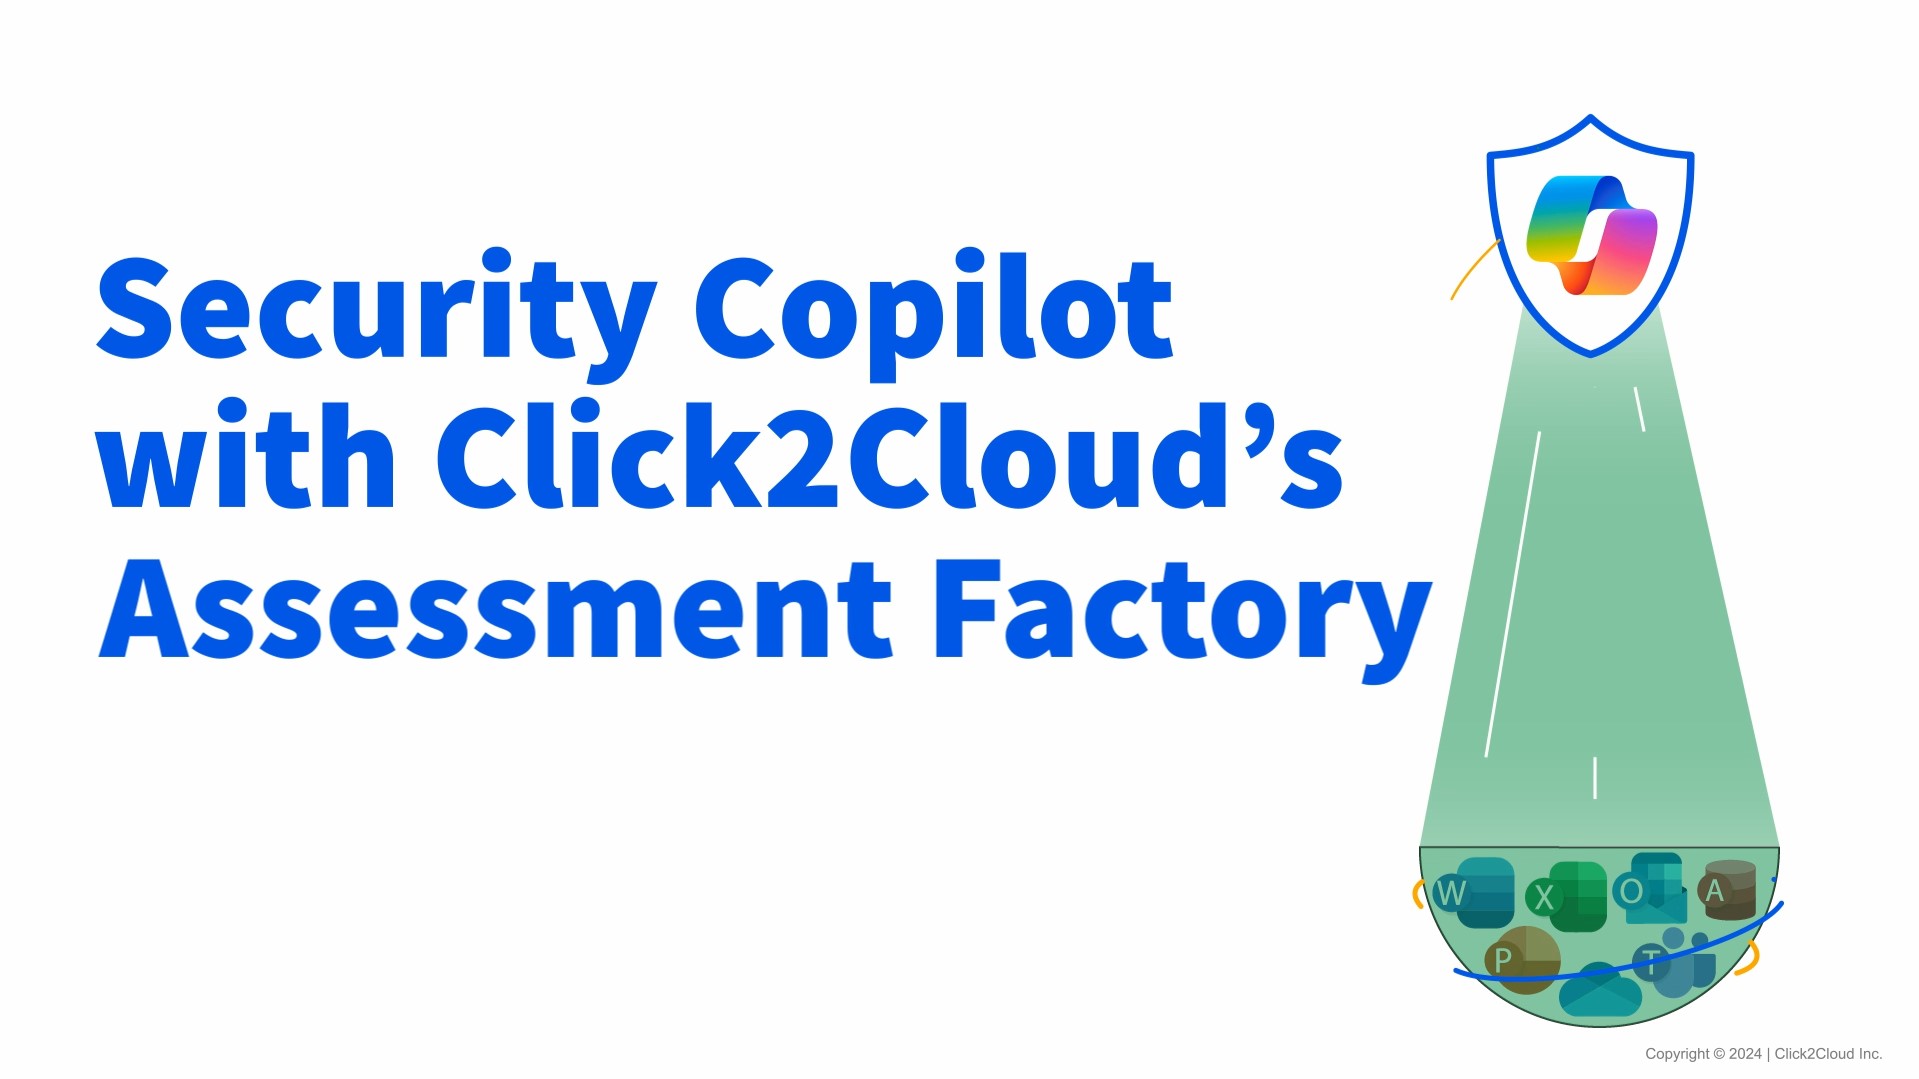 Stay Ahead of Threats Proactively with Click2Cloud’s Security Copilot Readiness Assessment-Click2Cloud